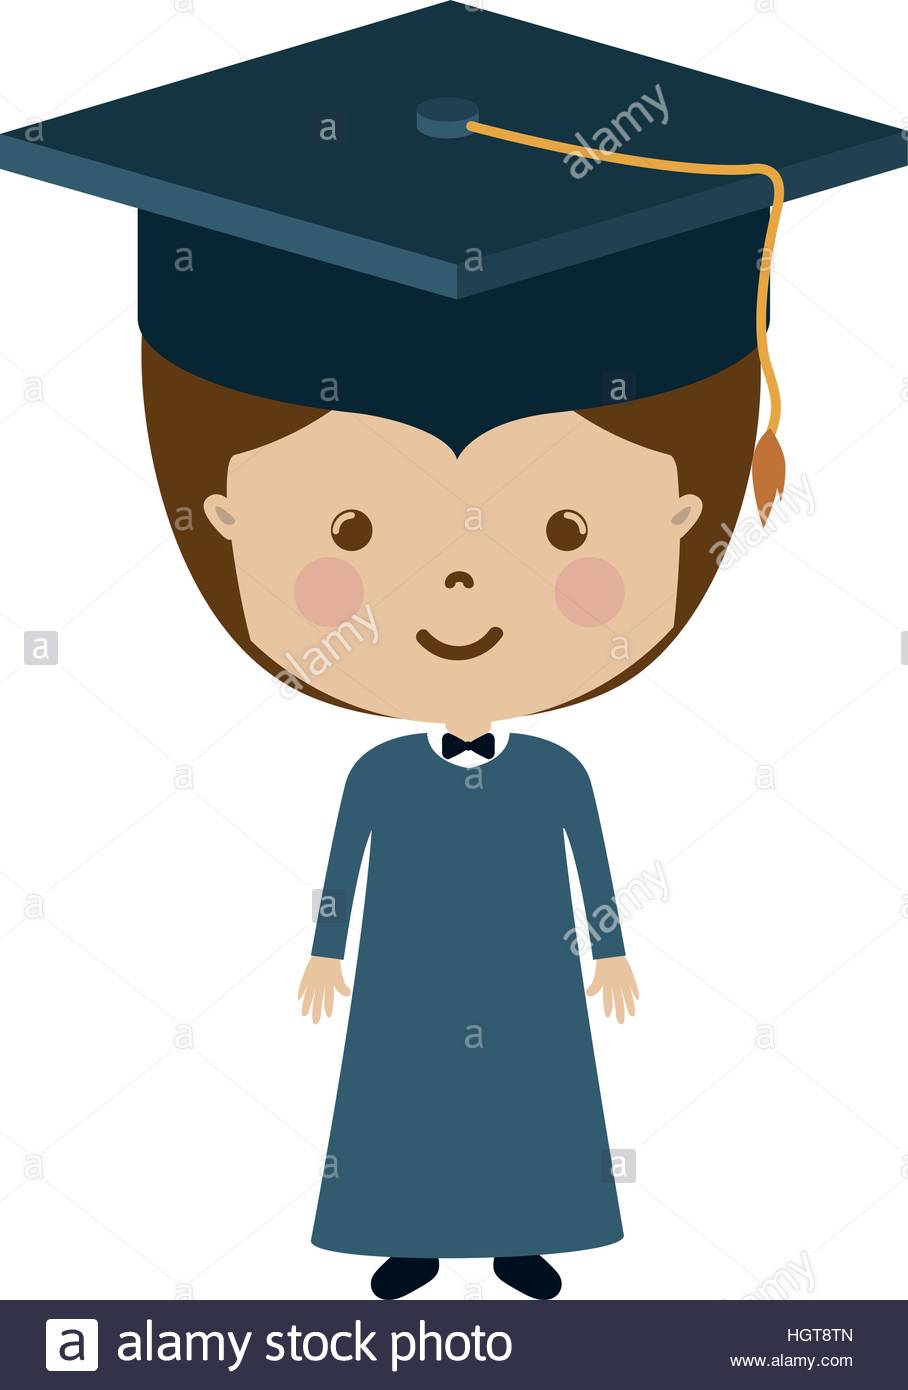 Graduation Cap Icon - free download, PNG and vector